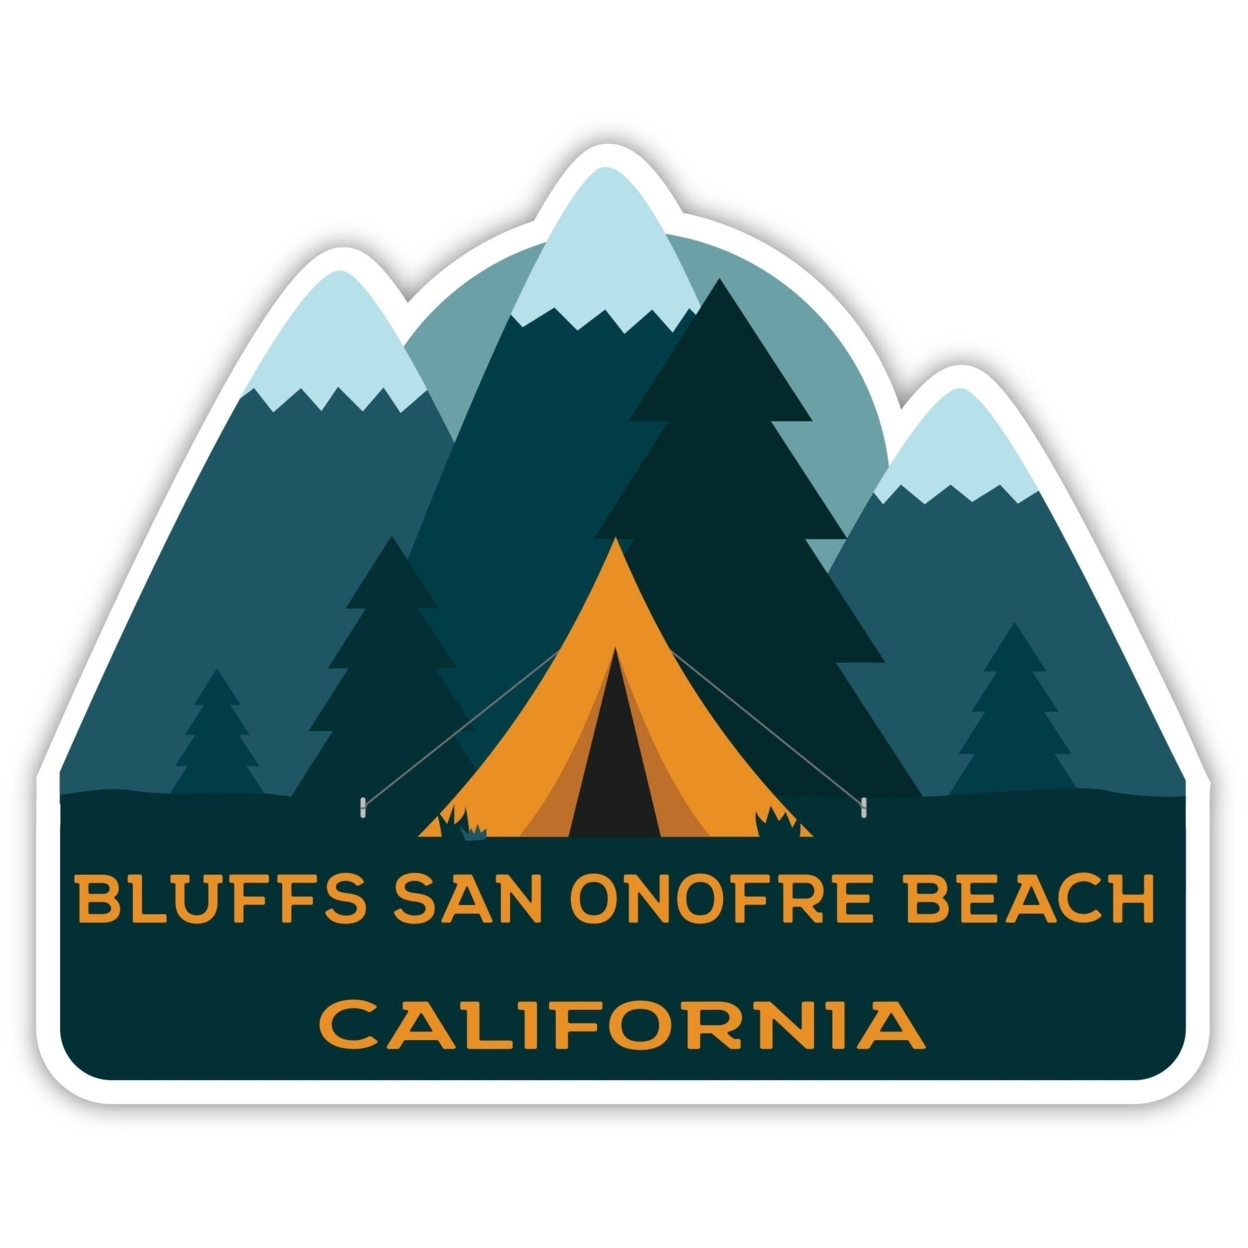 Bluffs San Onofre Beach California Souvenir Decorative Stickers (Choose Theme And Size) - 4-Pack, 10-Inch, Adventures Awaits